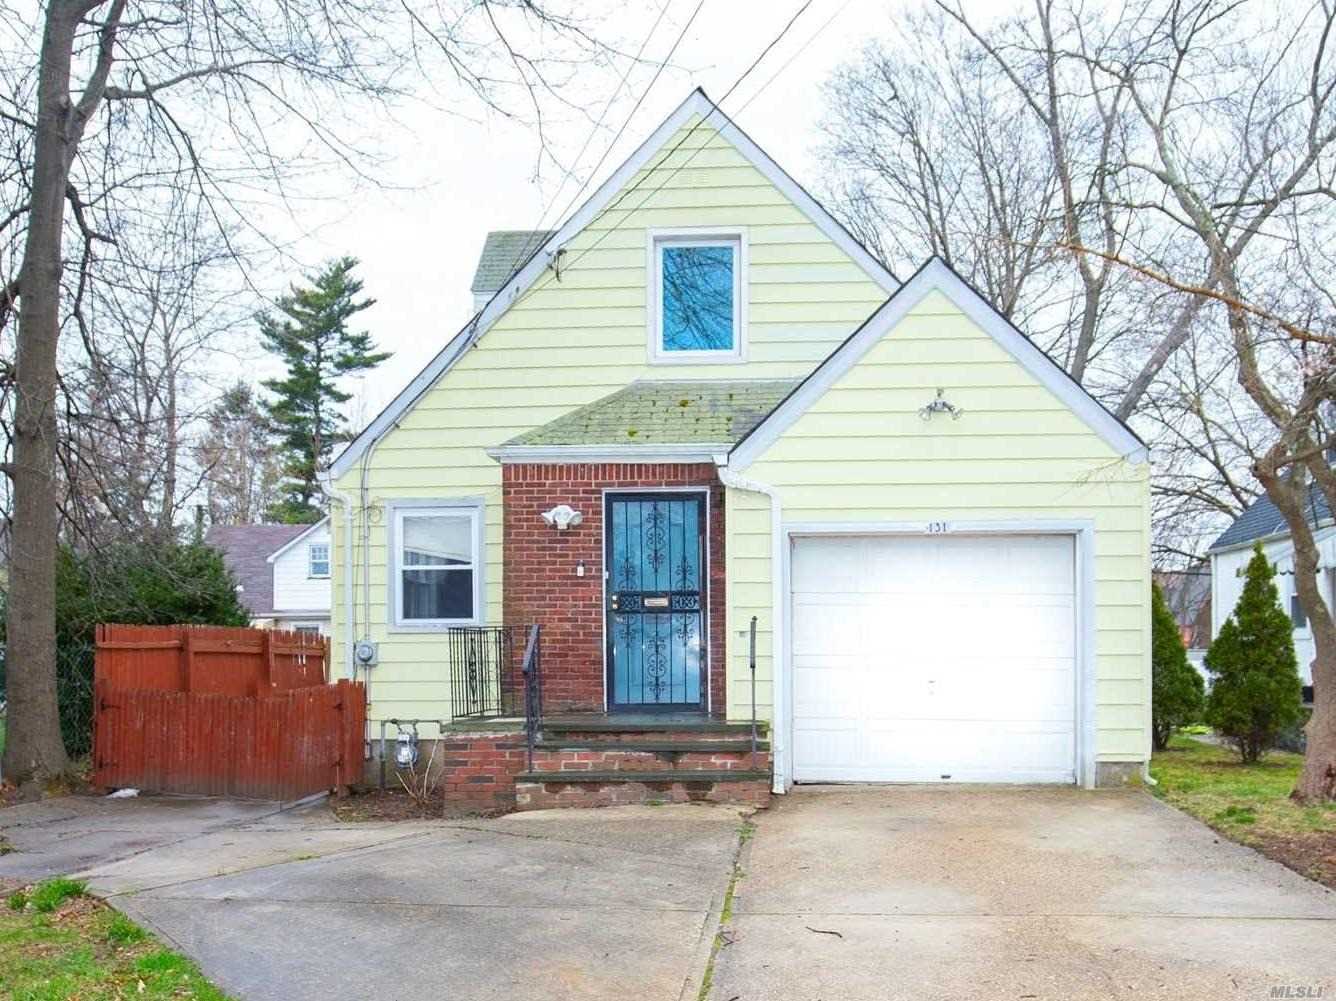 READY TO MOVE IN! Renovated Home. New Plumbing, New Hot Water Heater, New Bathrooms, New Hardwood Floors Throughout, New Upgraded ADT Alarm system. Spacious Backyard. Home Warranty Transferable...Covers Buyer After Closing.